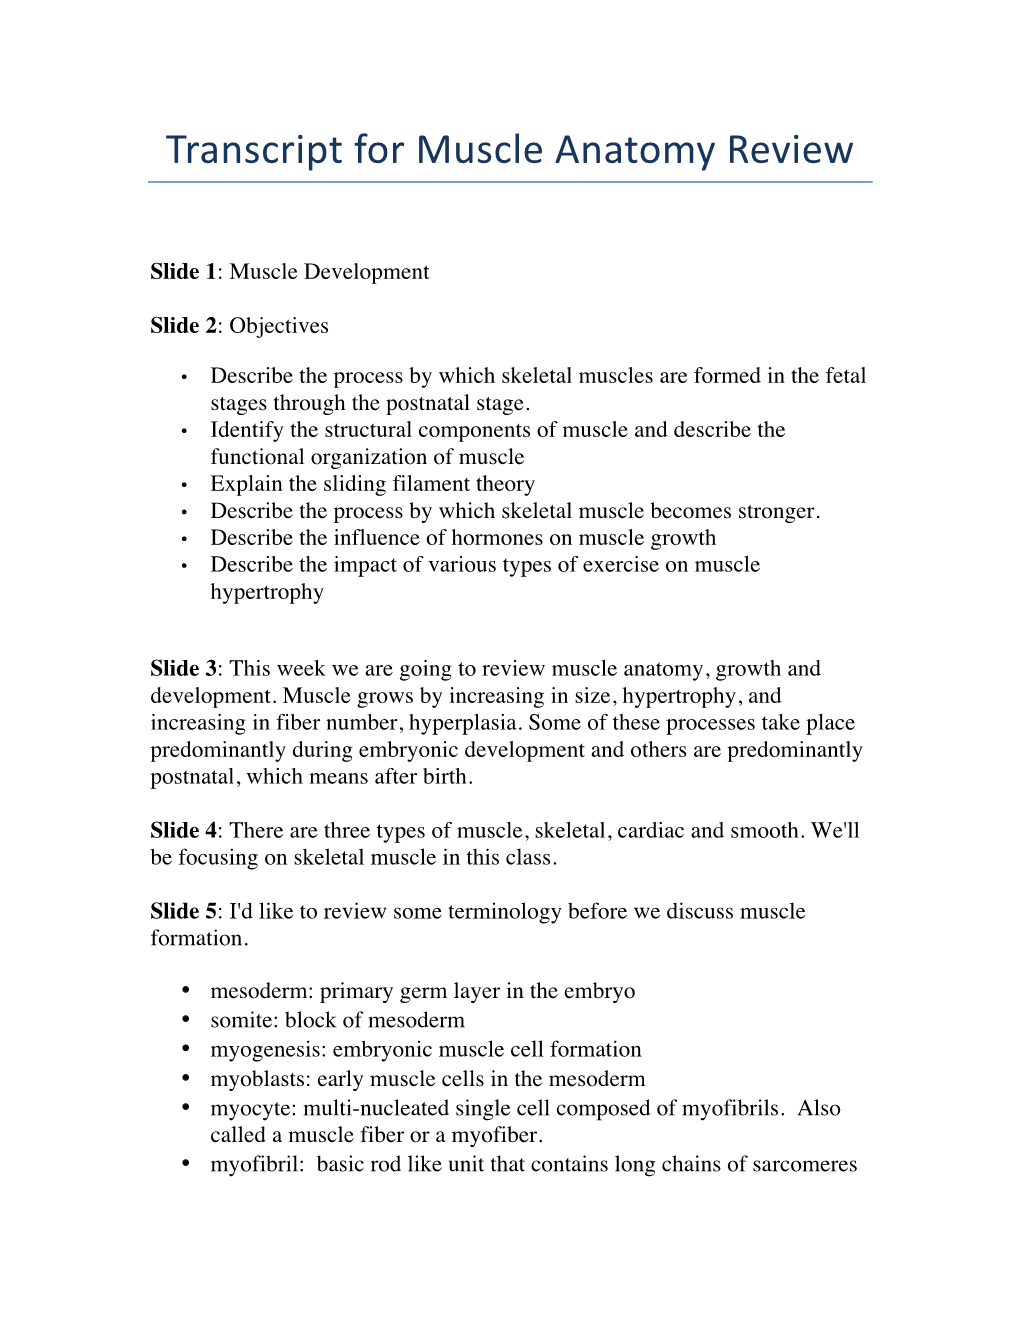 Transcript for Muscle Anatomy Review